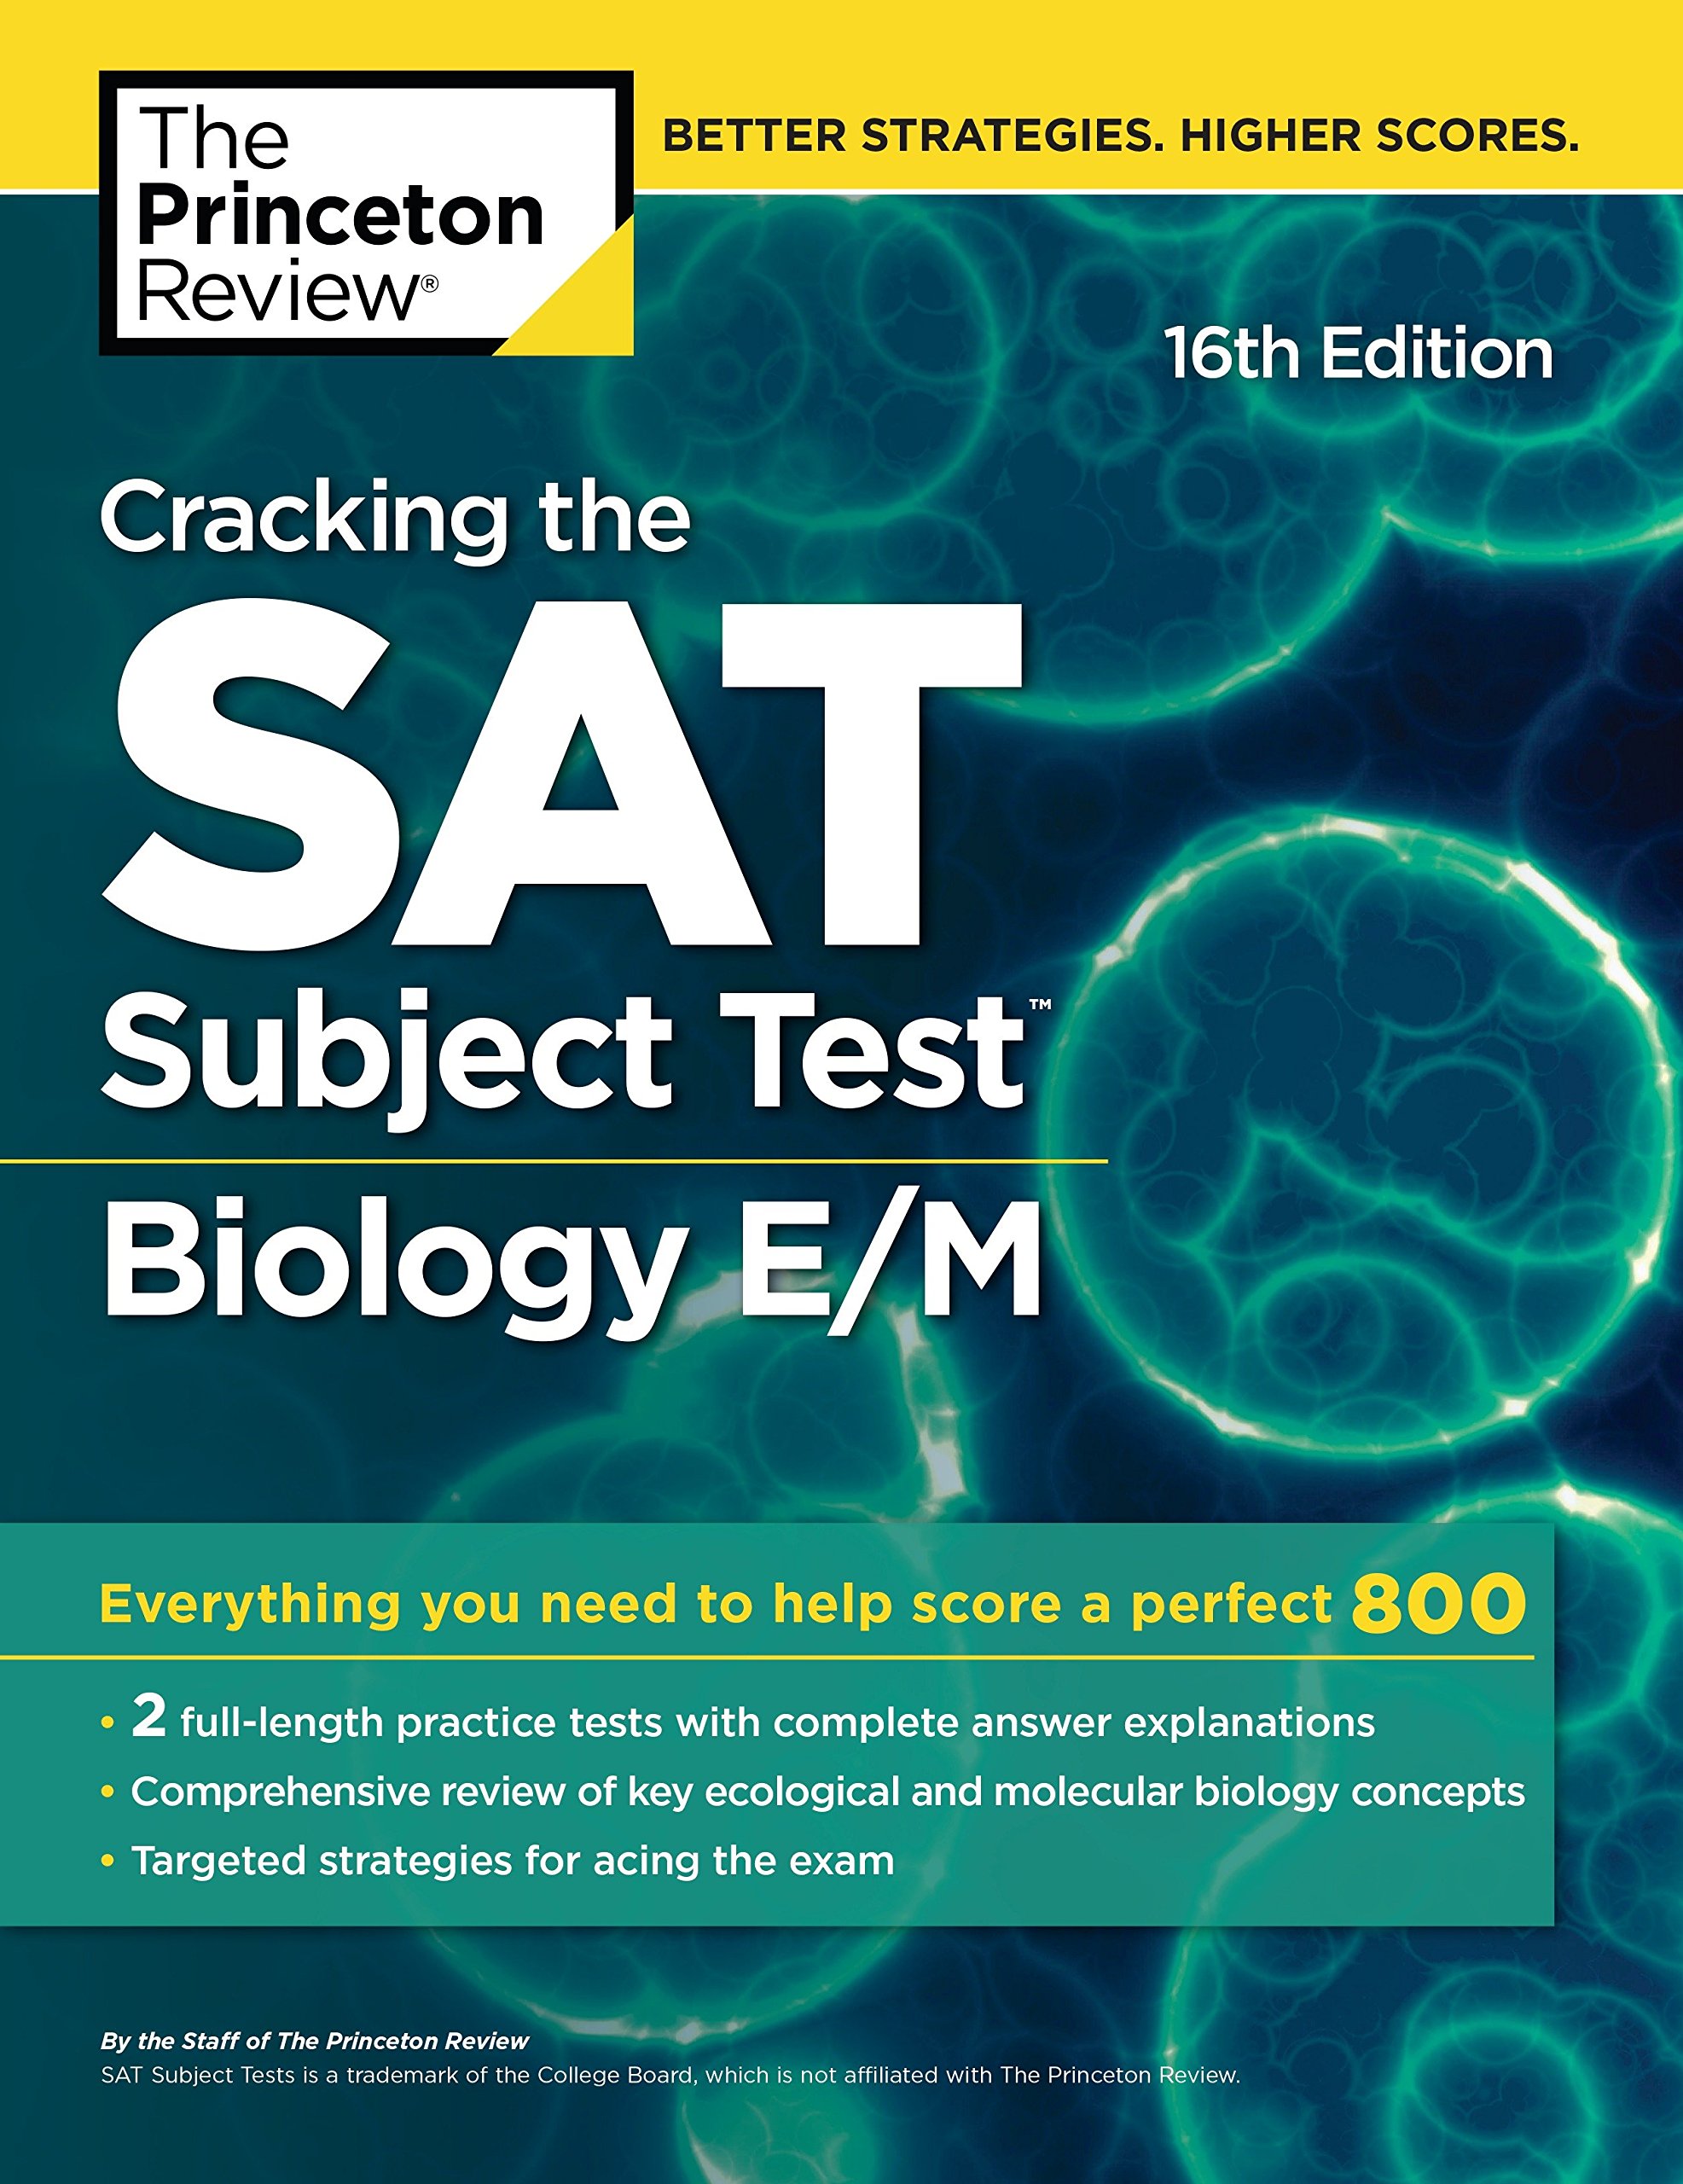 Cracking the SAT Subject Test in Biology E/M, 16th Edition